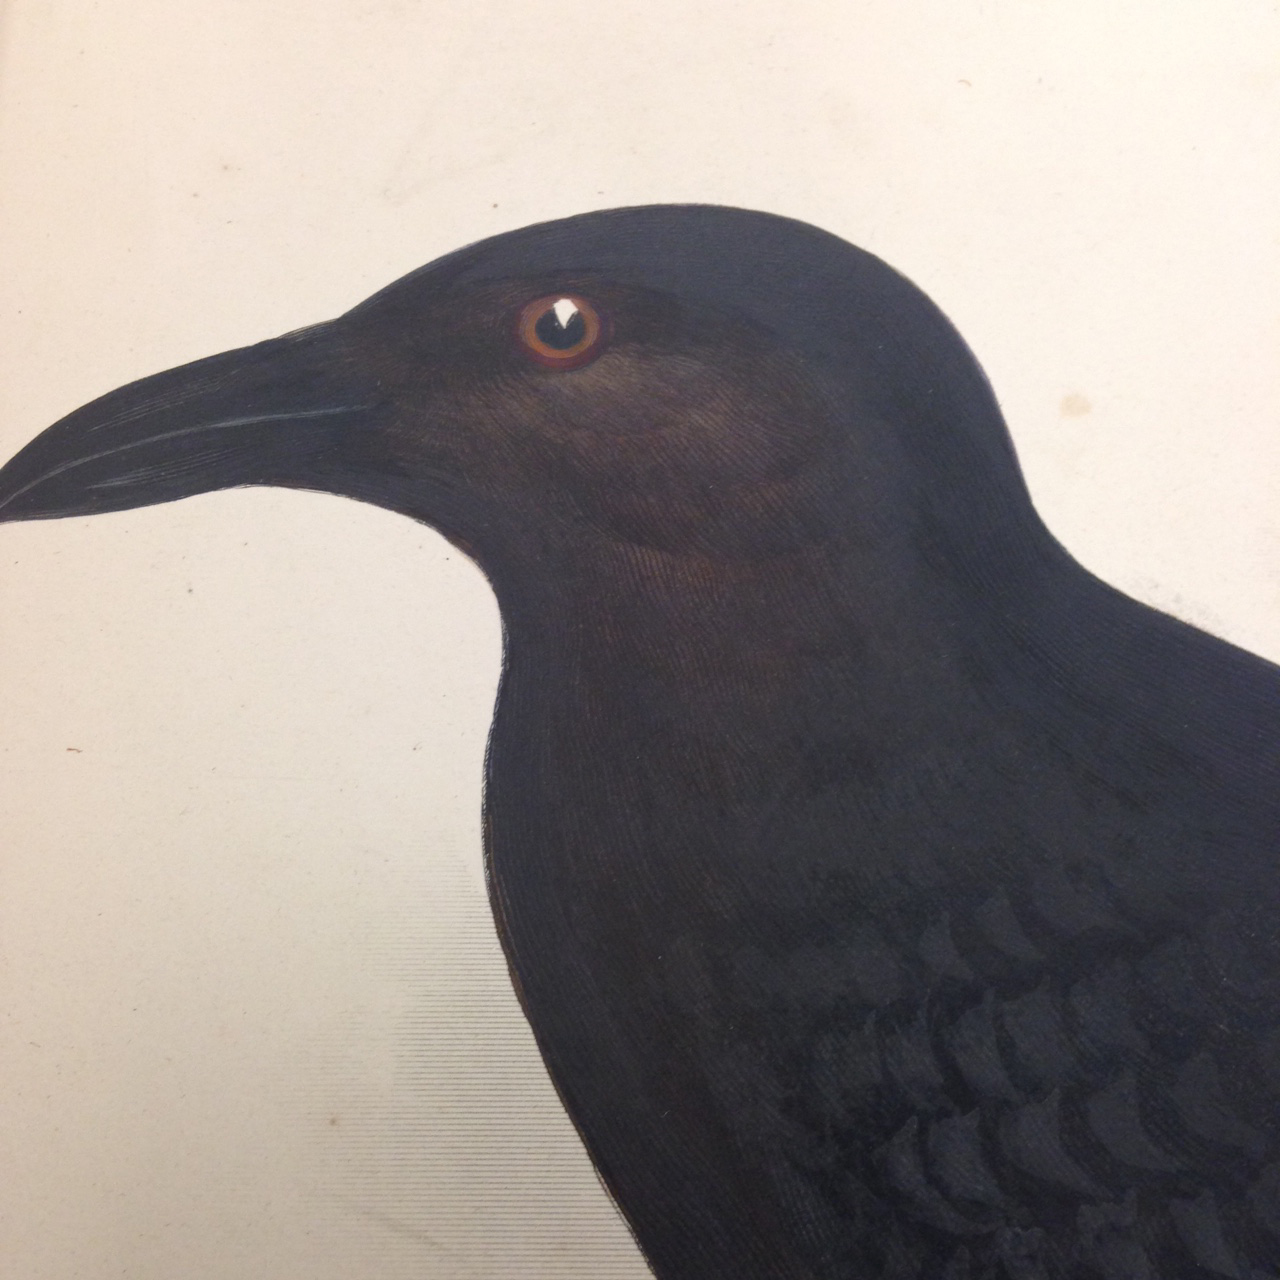 Ornithology, Plate 5: Corvus ruficollis (Brown-necked raven). – Close-up on that ever-watchful eye…No wonder Poe was wary!